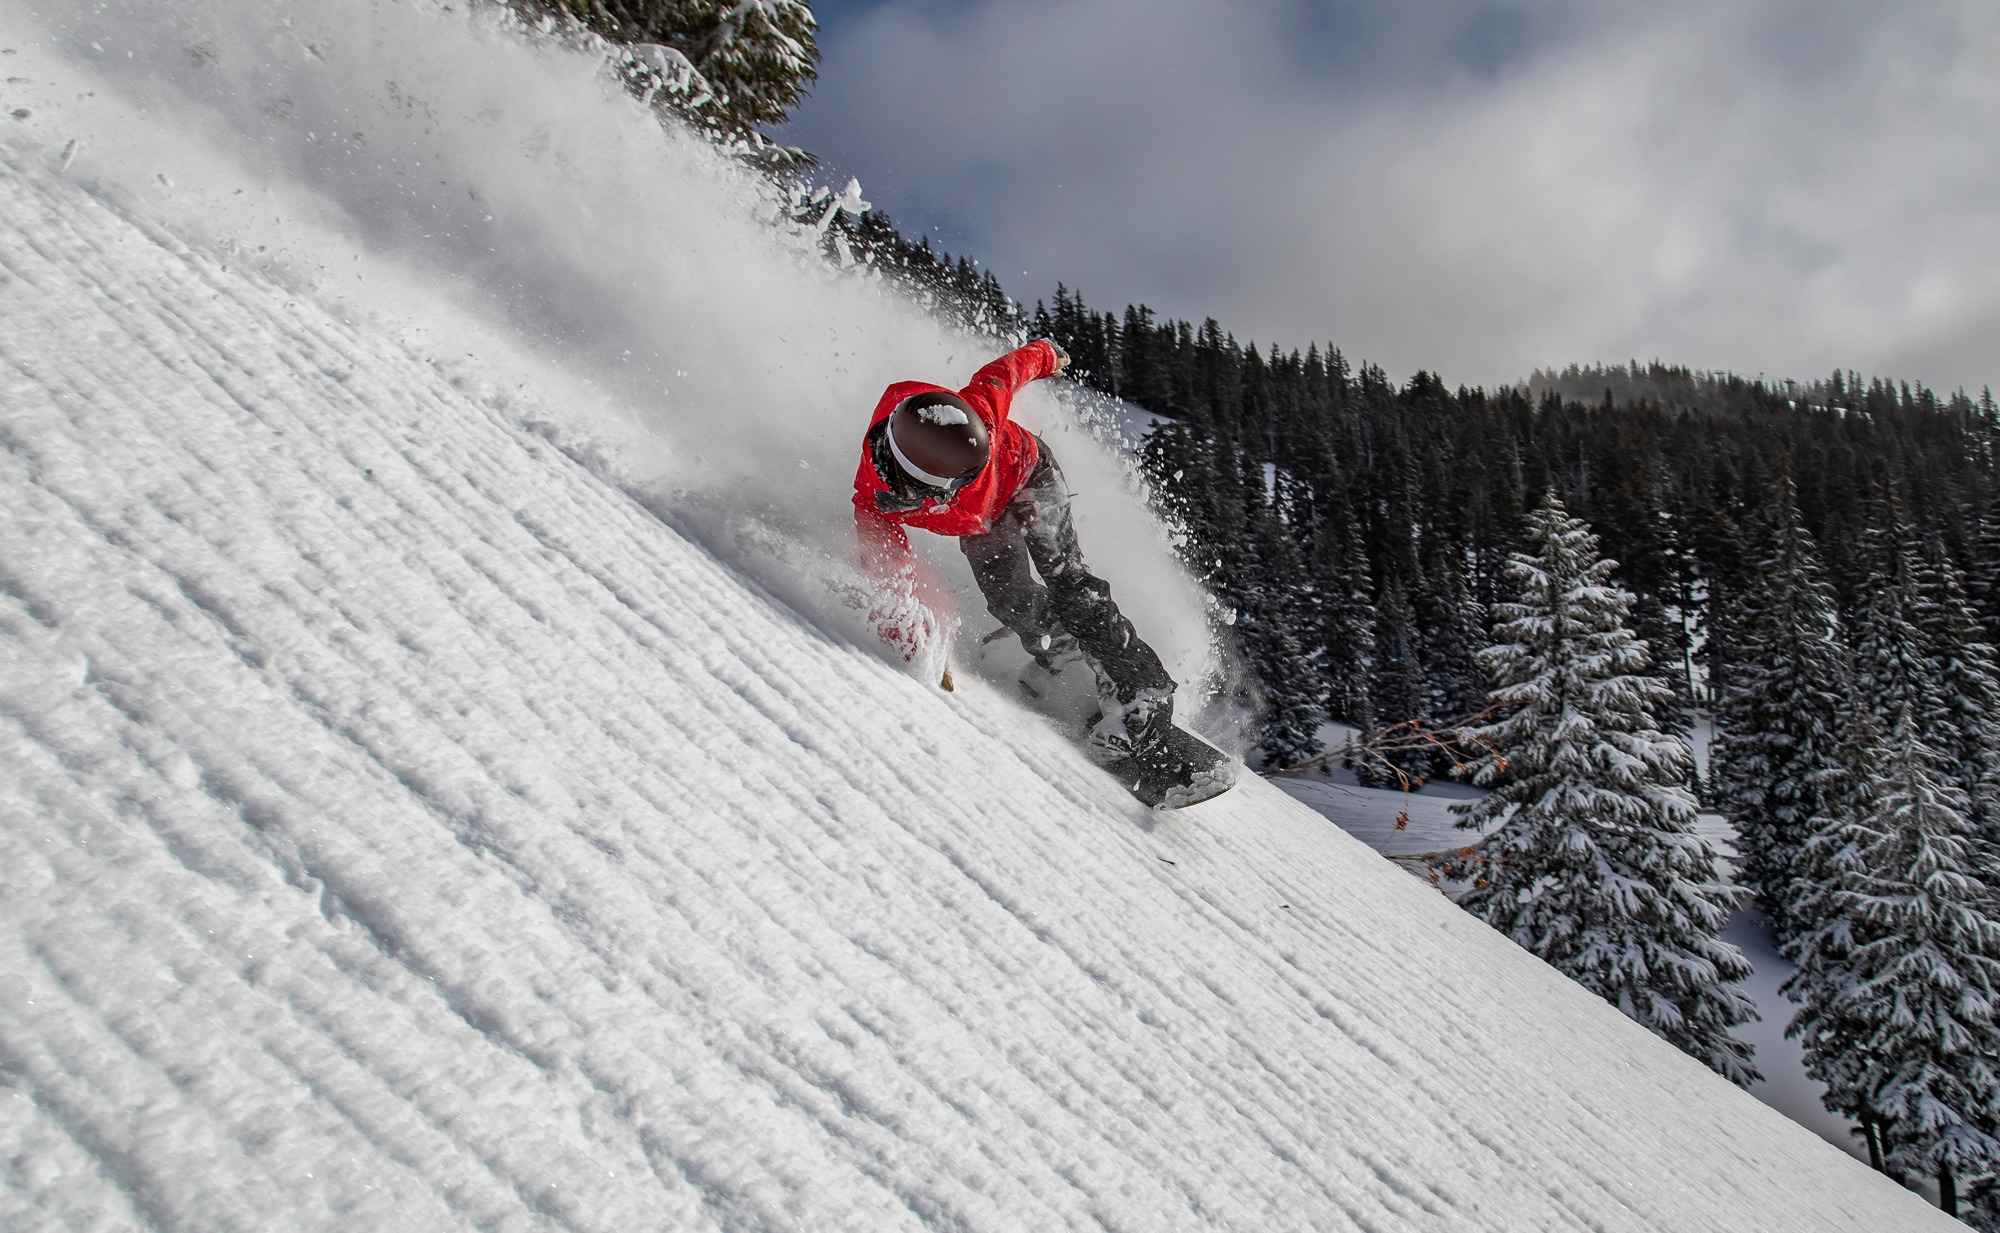 A snowboarder in a red coat shredding at Mount Hood Meadows.